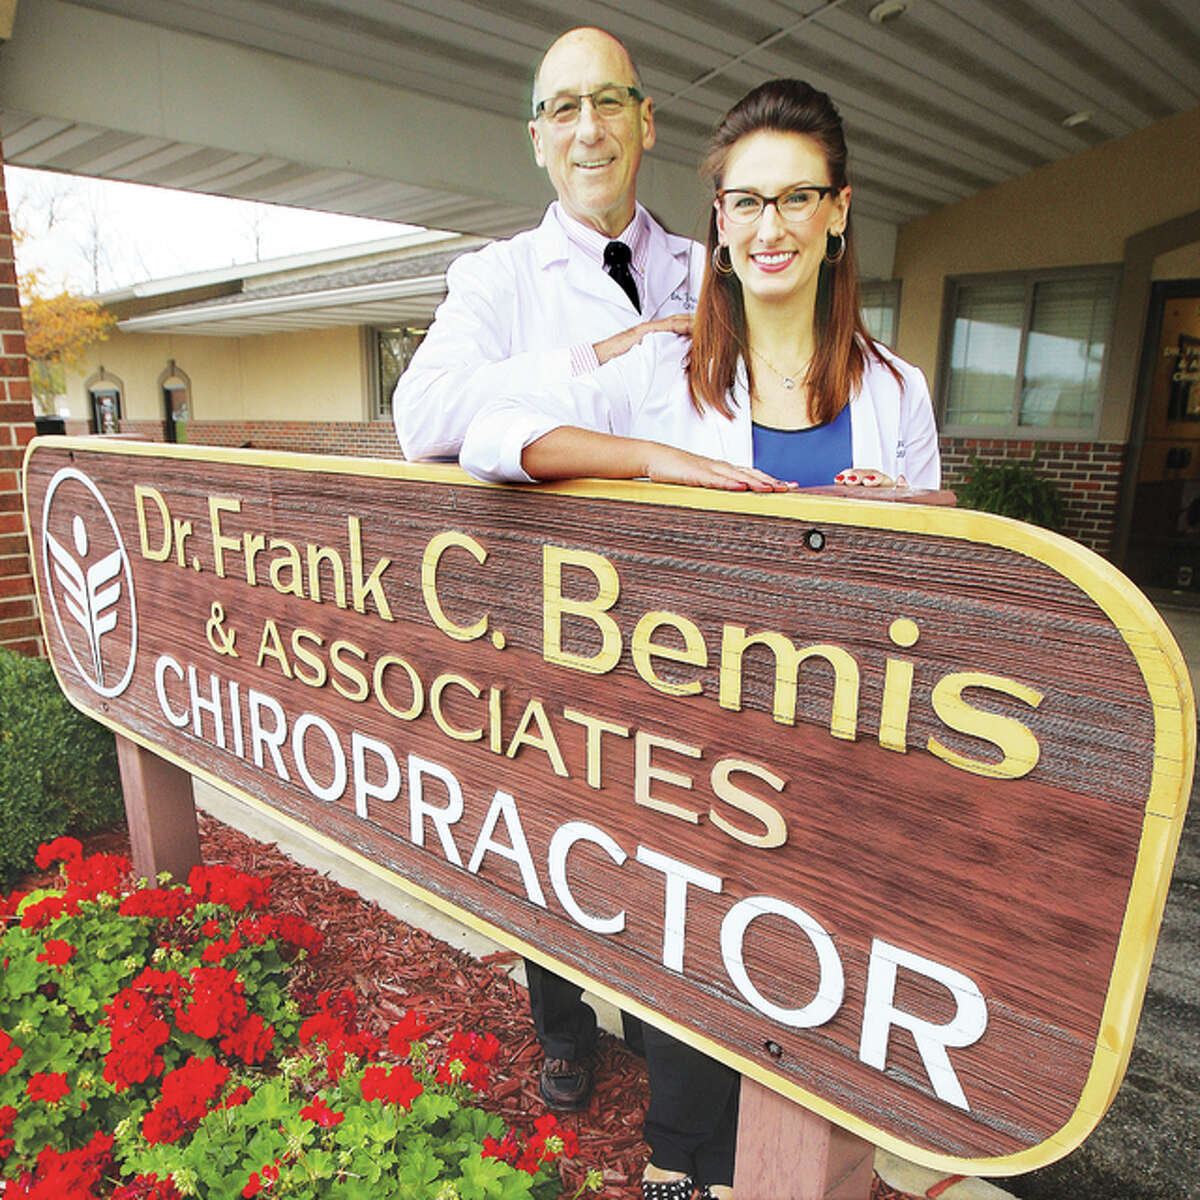 Dr. Frank Bemis stands with his daughter, Dr. Kristina E. Bemis, and the next generation of Bemis chiropractors, outside their offices at 4105 Humbert Road in Godfrey. John Badman|The Telegraph